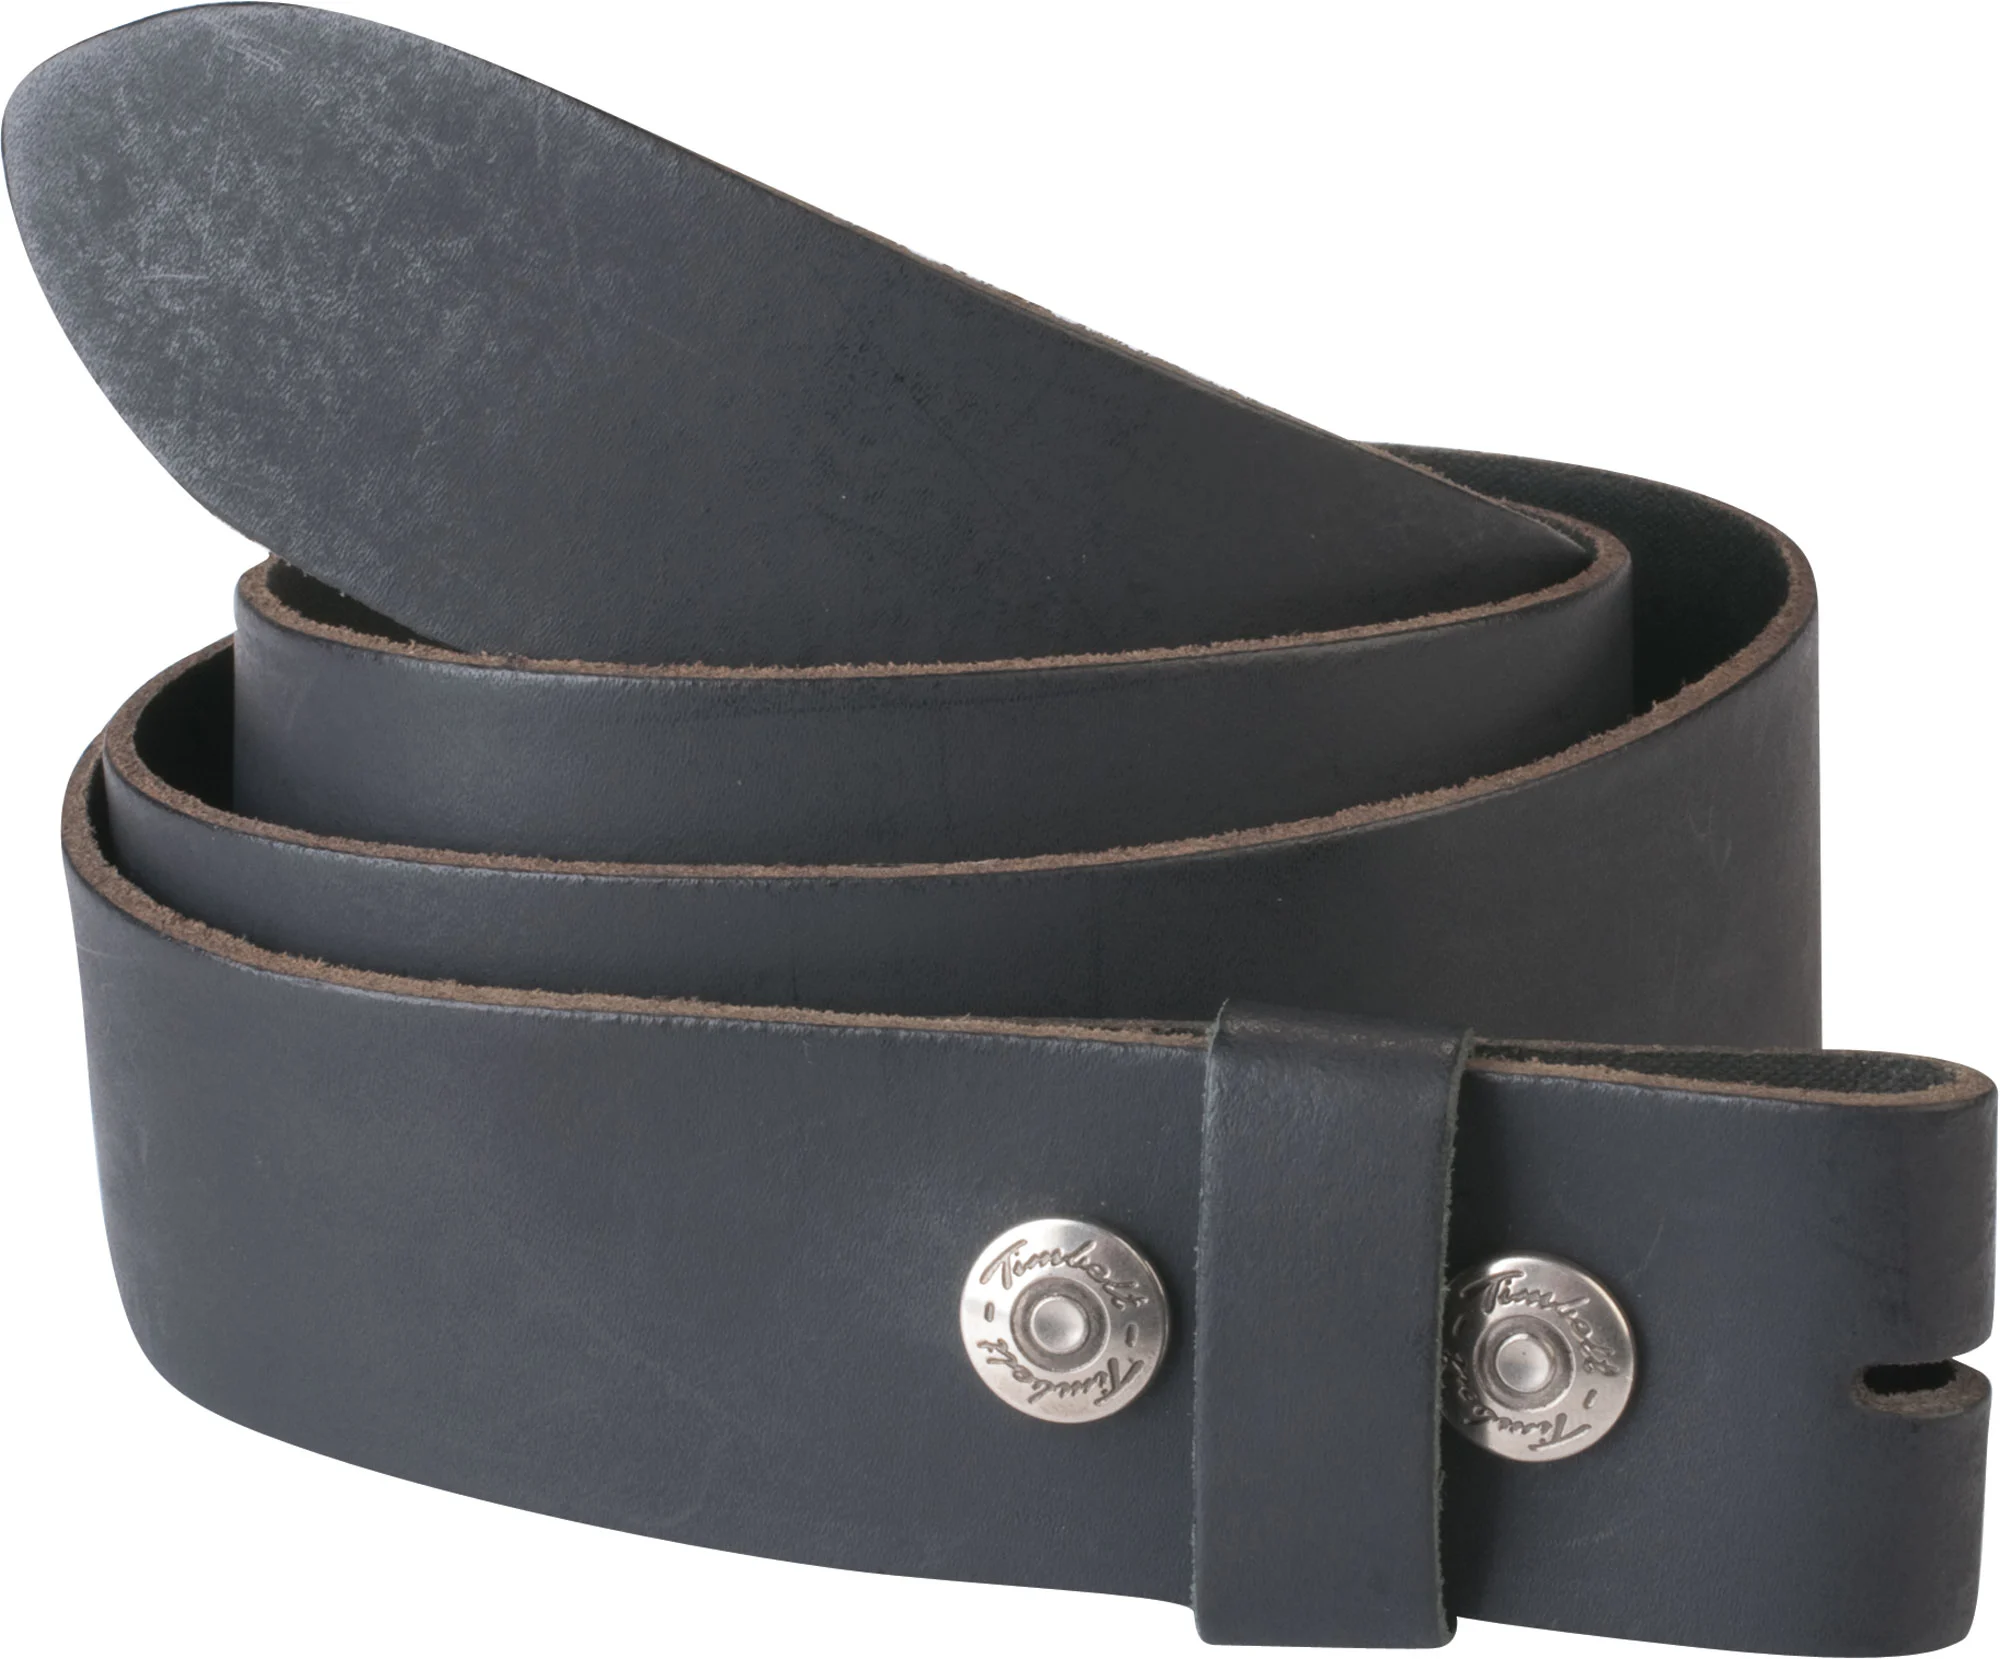 LEATHER BELT FOR BUCKLES